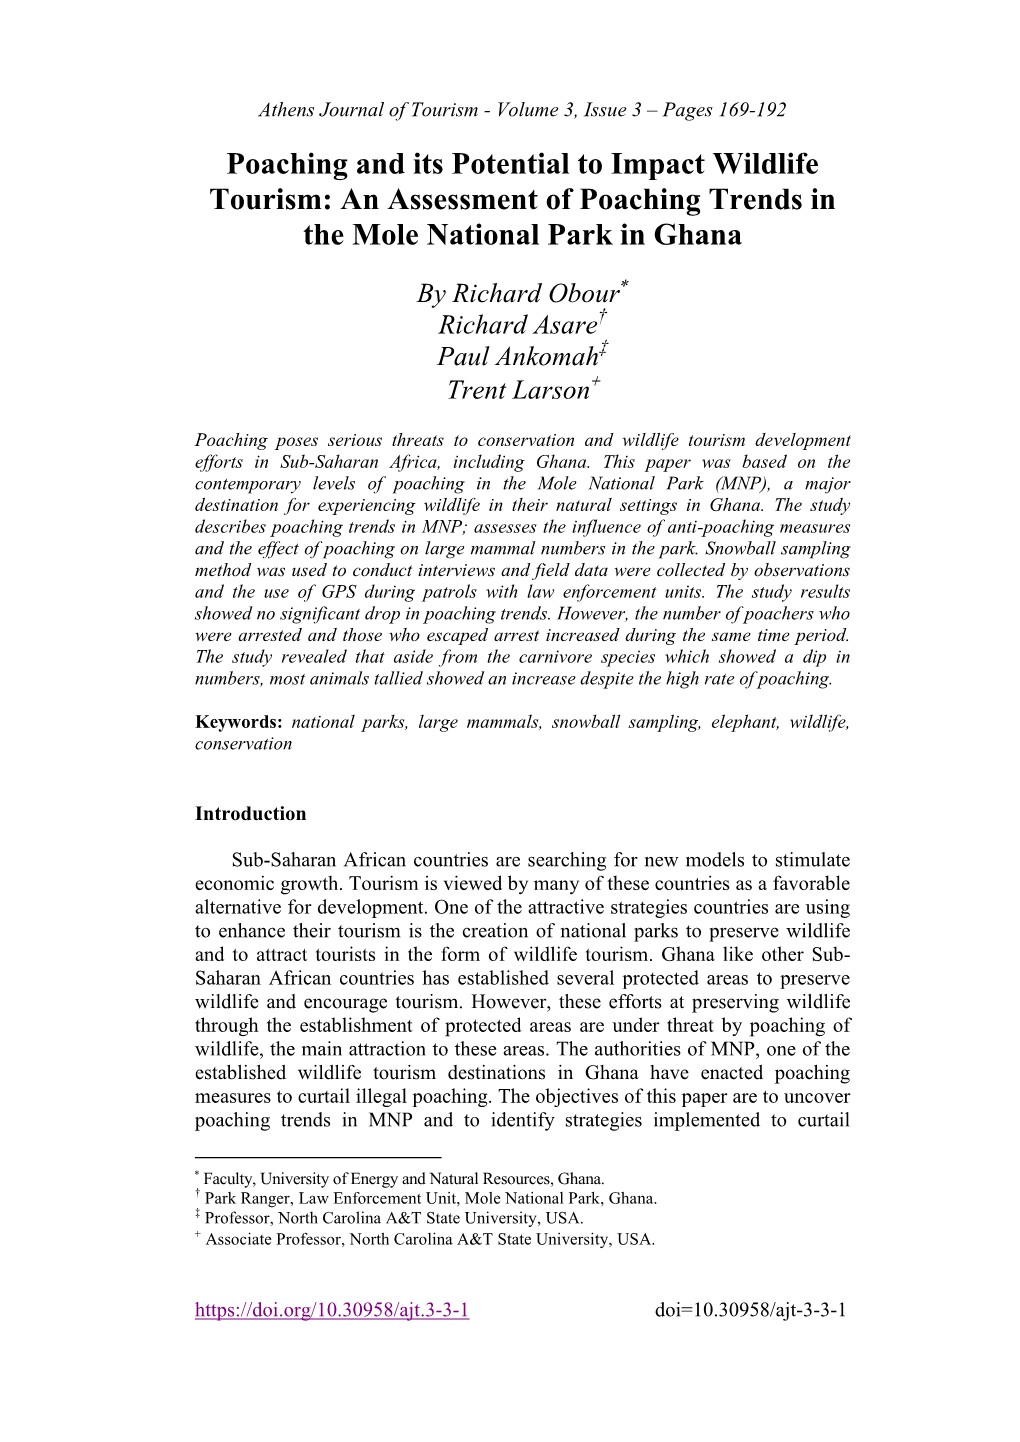 Poaching and Its Potential to Impact Wildlife Tourism: an Assessment of Poaching Trends in the Mole National Park in Ghana